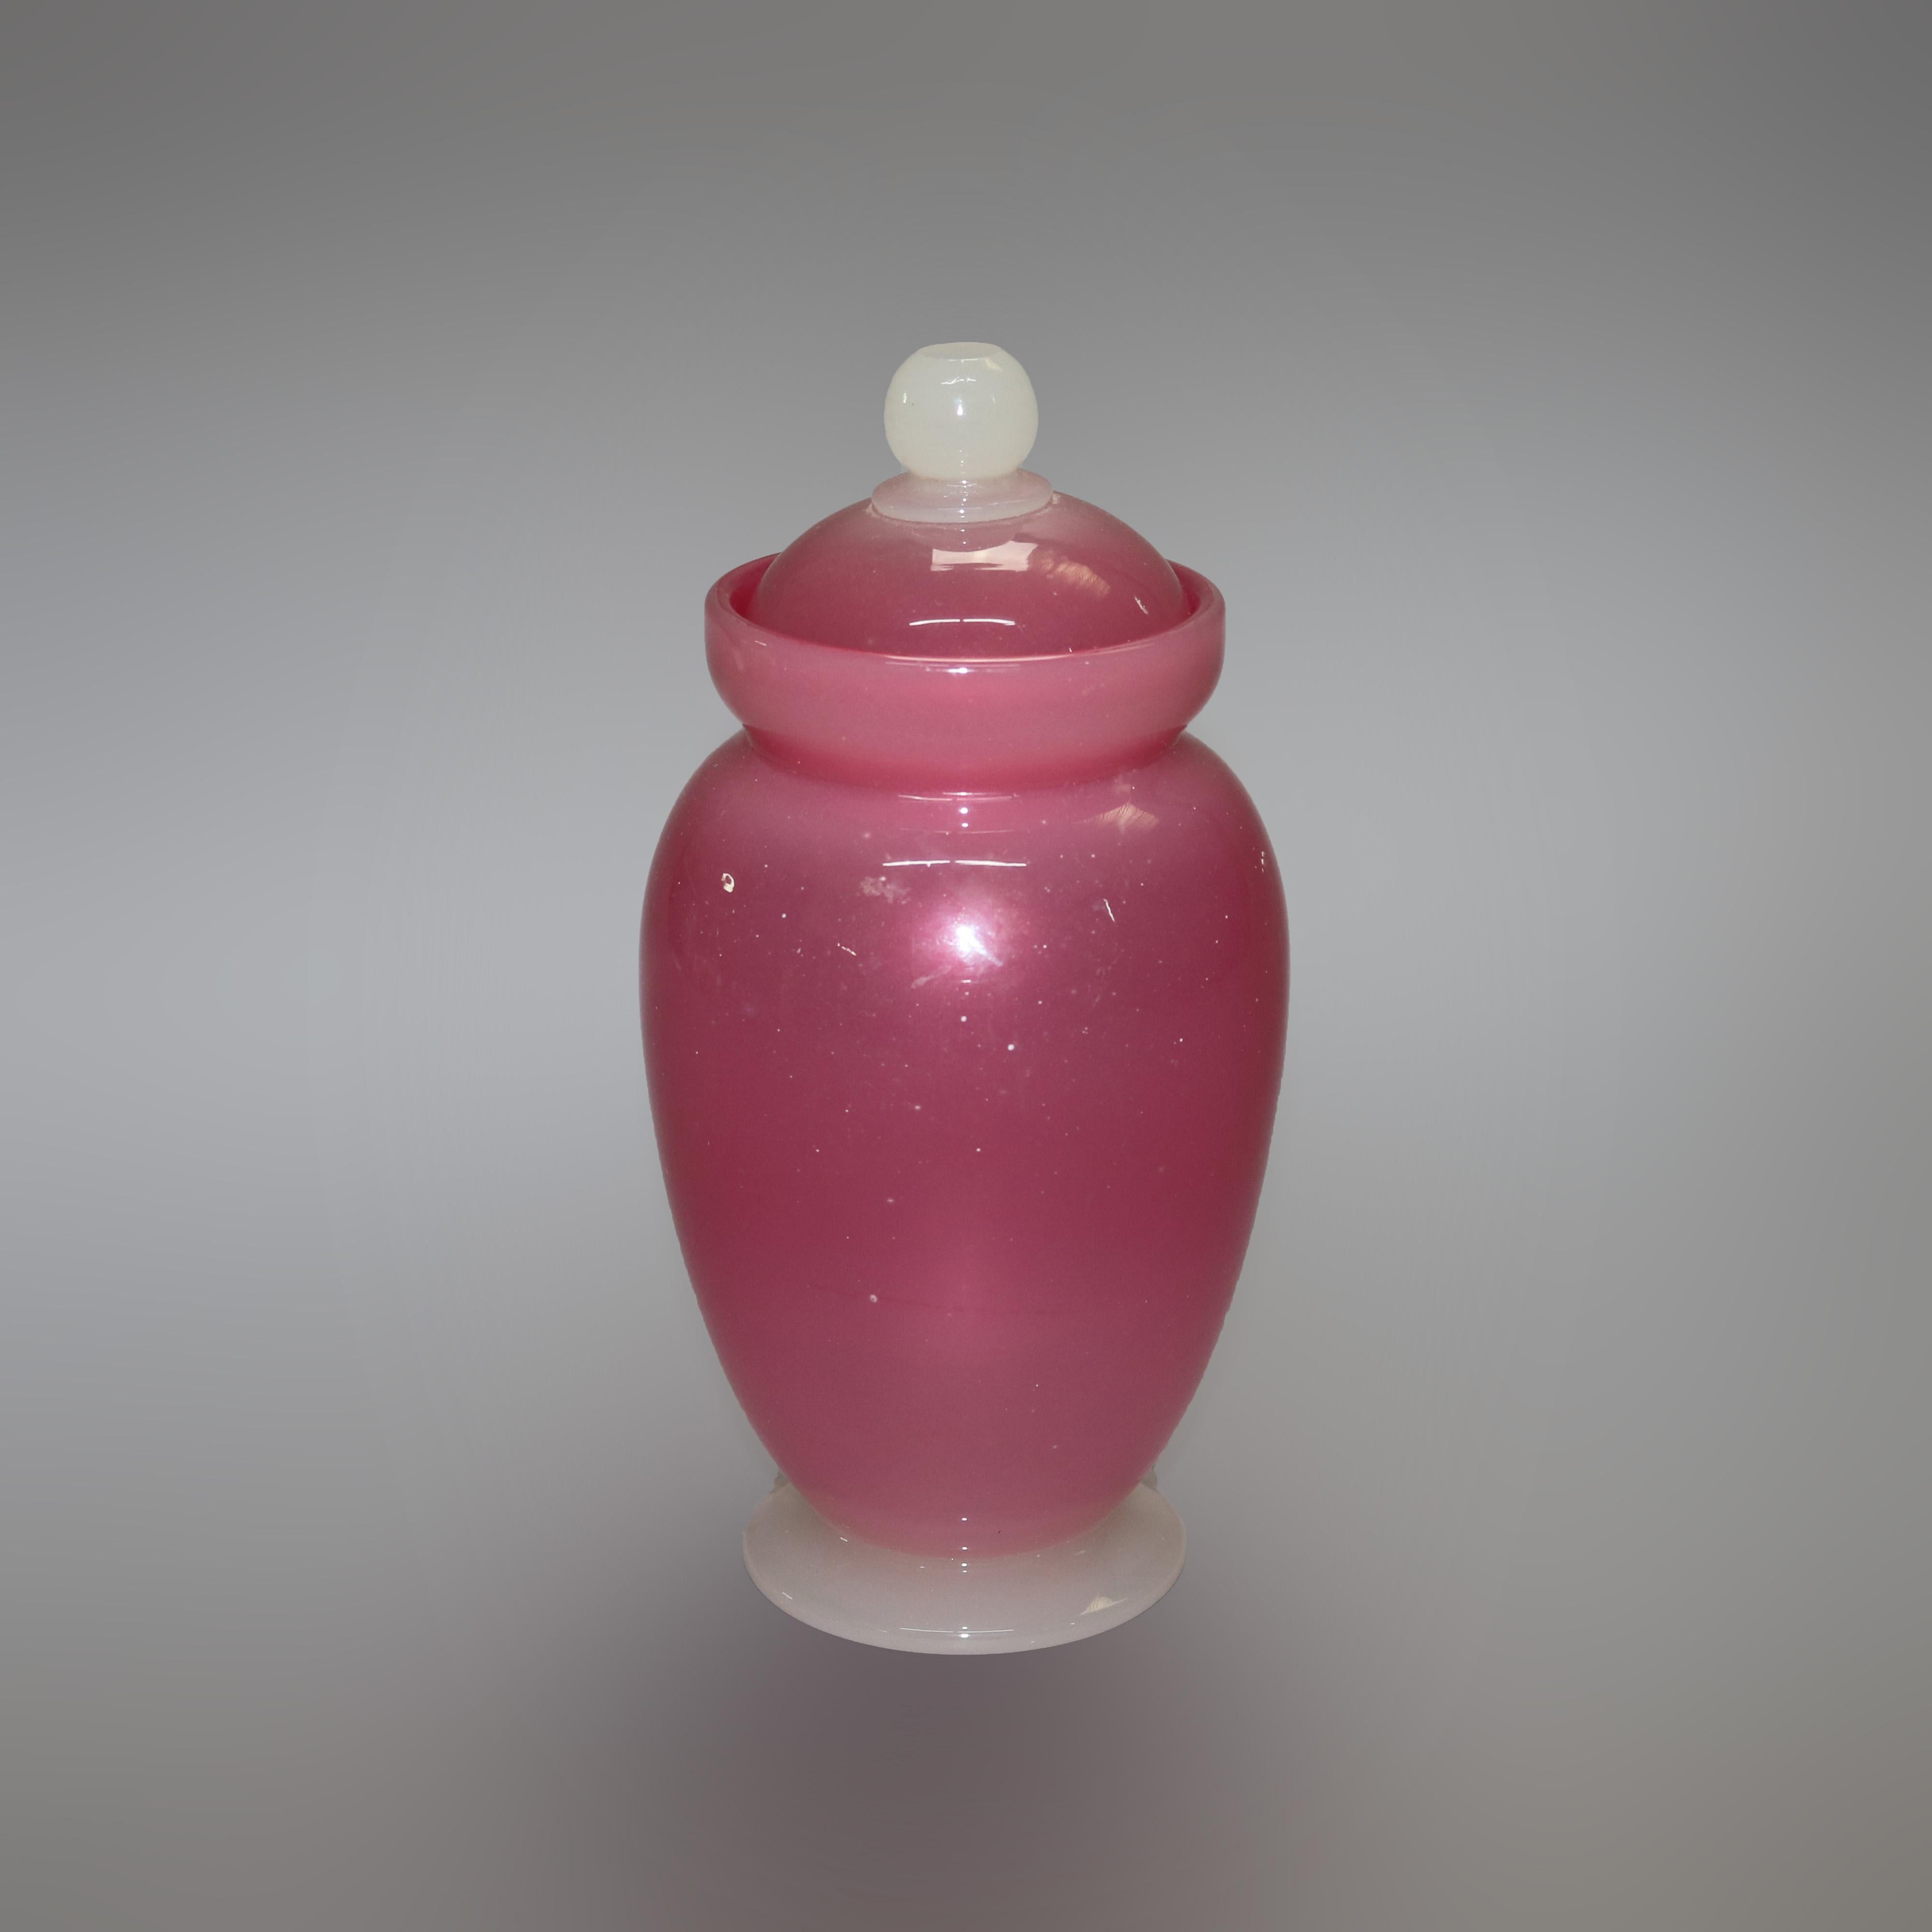 An antique lidded urn by Frederick Carder of Steuben offers rosaline art glass vessel and lid on alabaster art glass foot, signed on base F. Carder and Steuben as photographed, c1920

Measures - 9.5''height x 4.5''diameter.